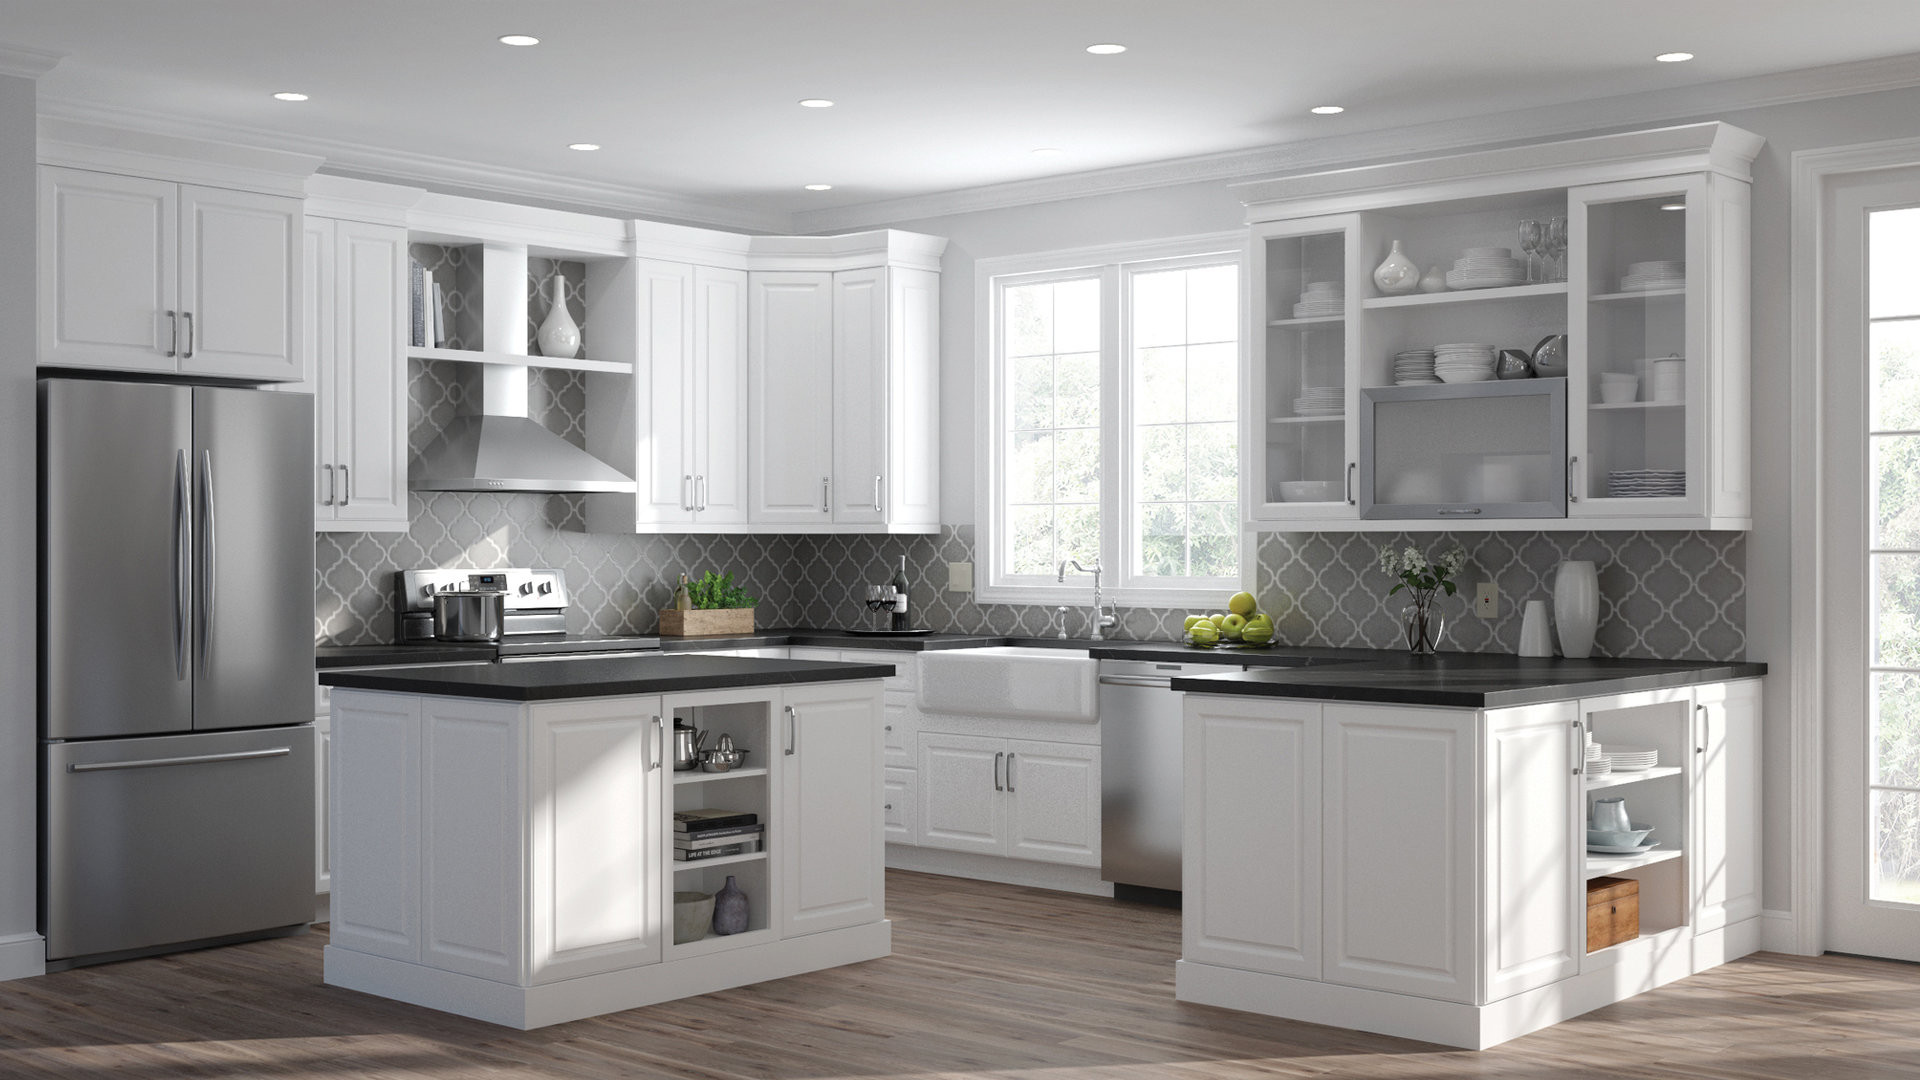 Kitchen Cabinet Walls
 Elgin Wall Cabinets in White – Kitchen – The Home Depot